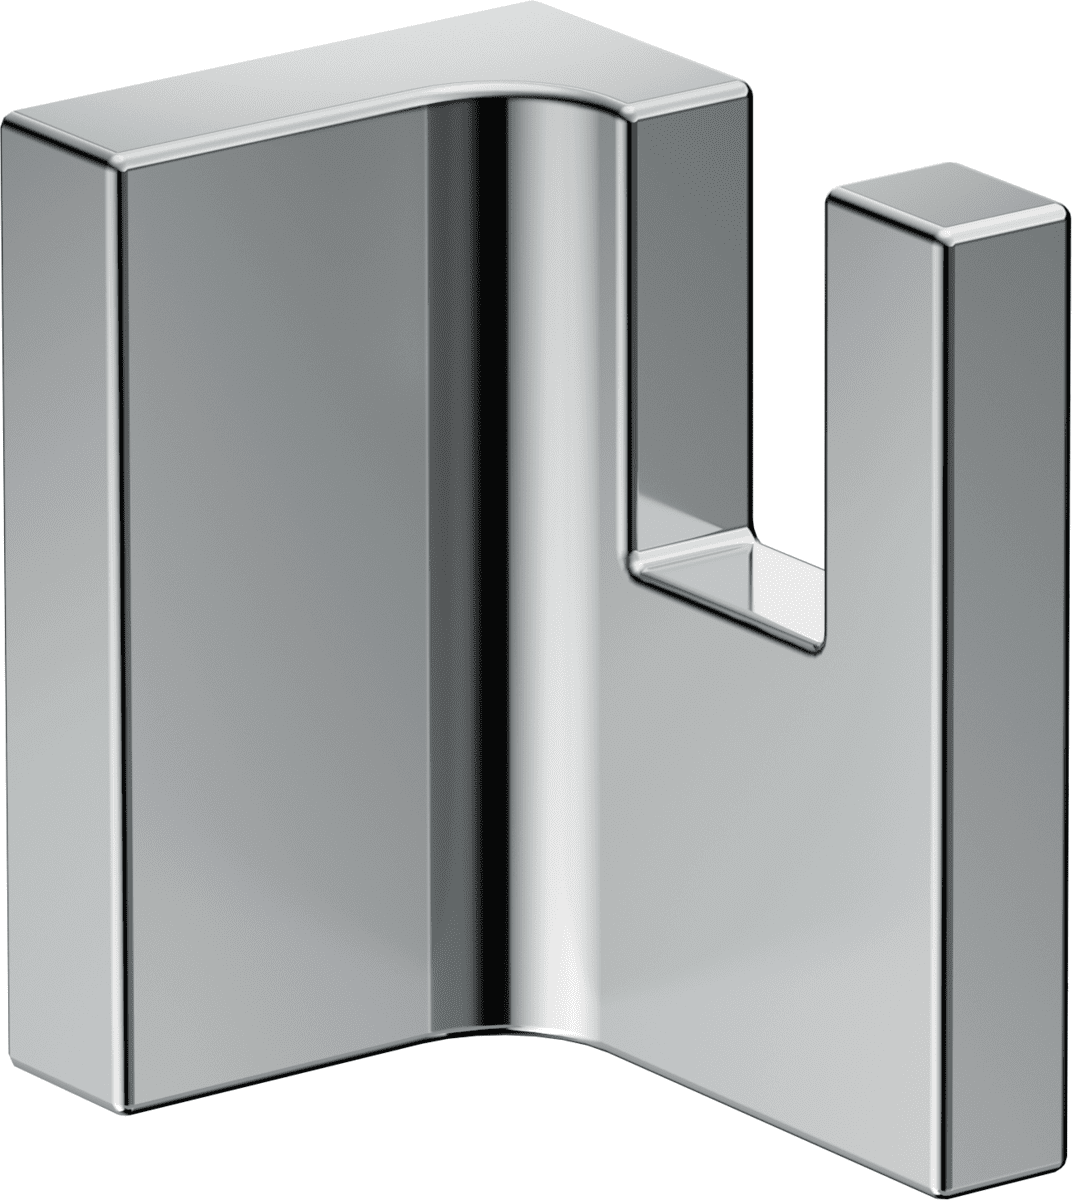 Picture of HANSGROHE AXOR Universal Rectangular Towel hook #42611000 - Chrome